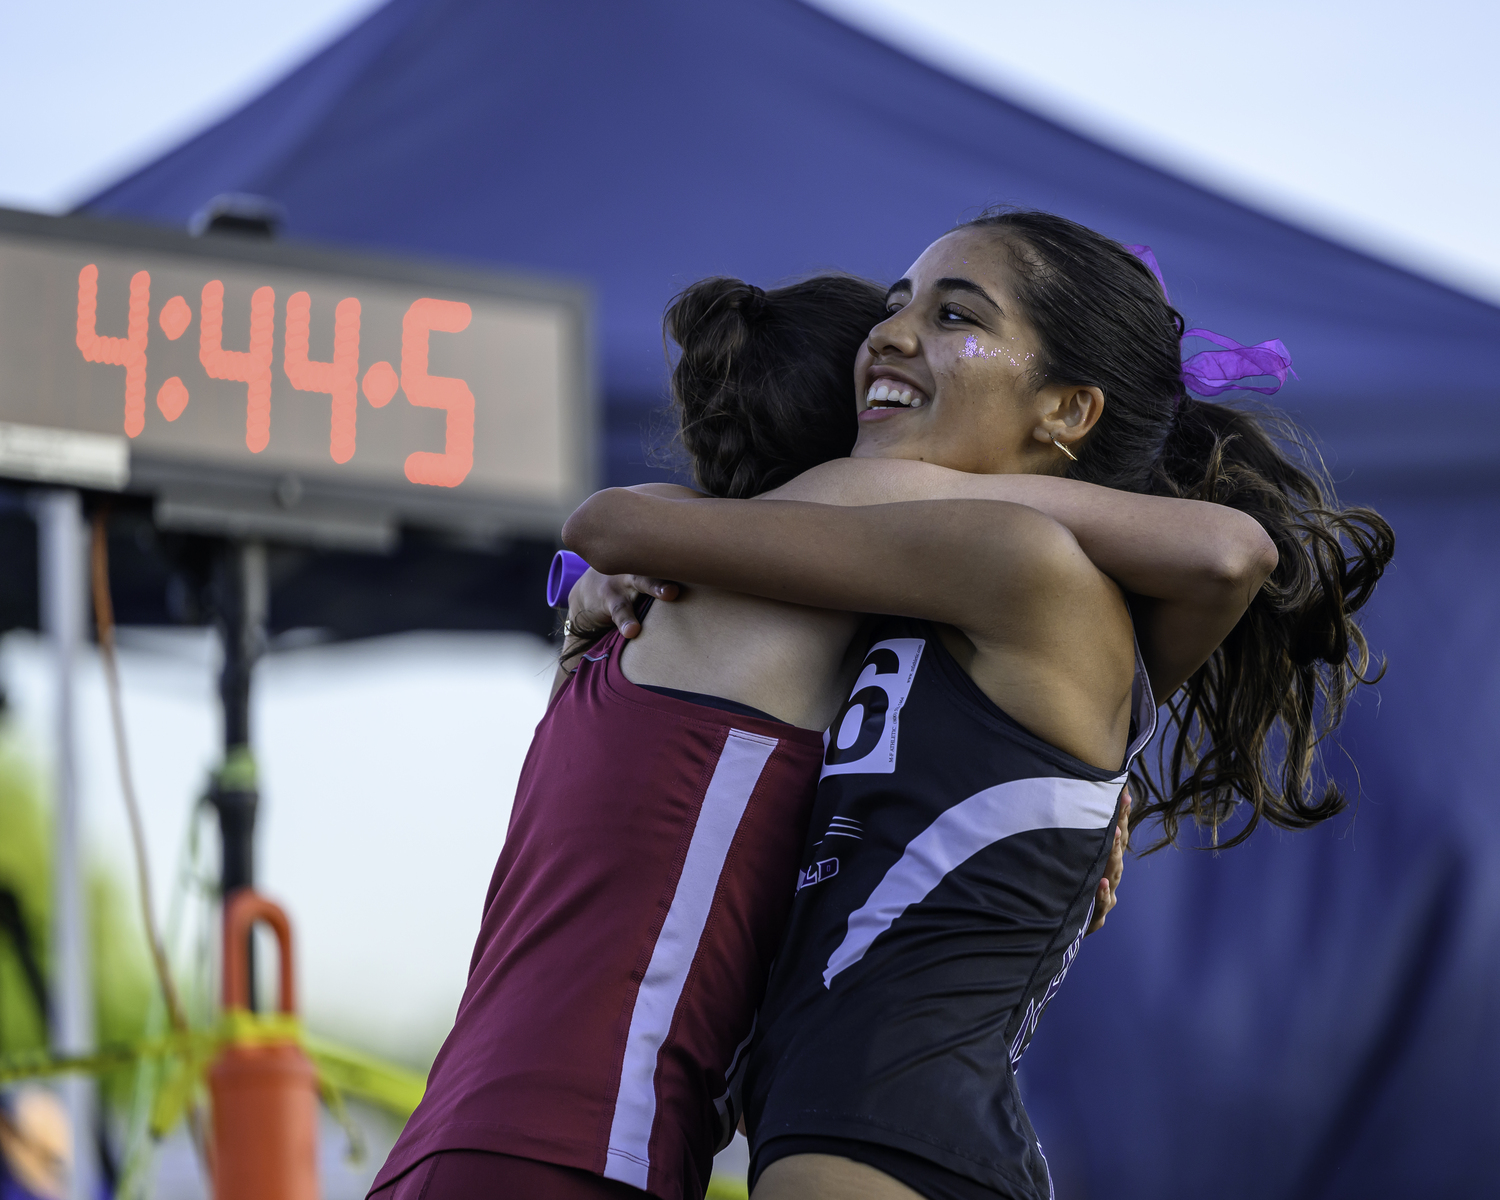 Southampton's Emma Suhr and Sofia Galvan of Hampton Bays hug each other after the end of the 4x400-meter relay.   MARIANNE BARNETT